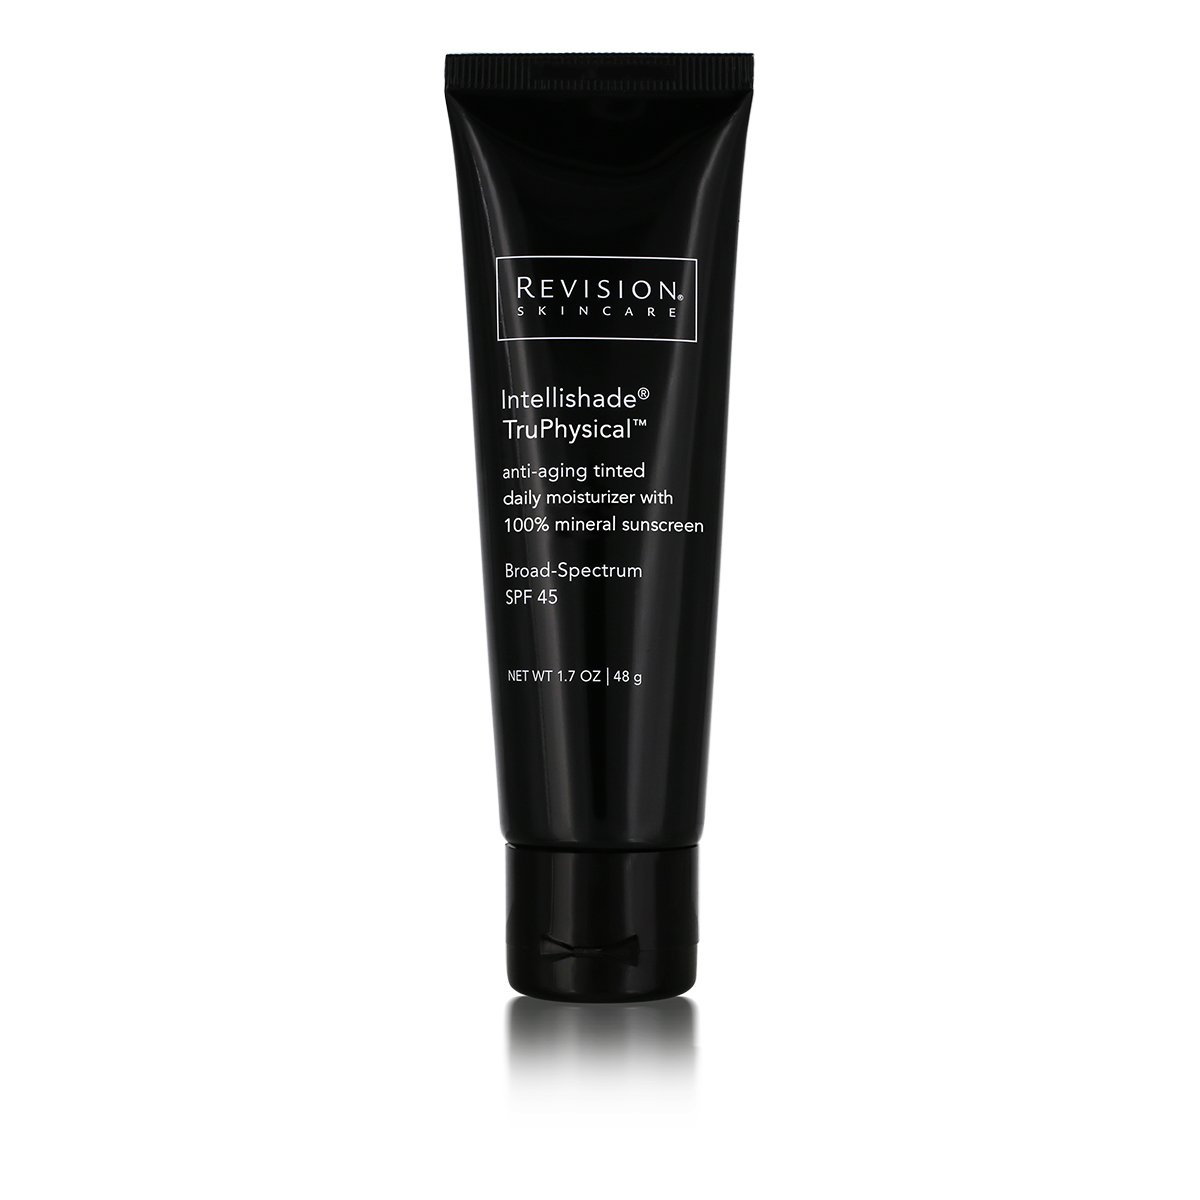 Anti-aging tinted moisturizer with 100% mineral sunscreen.